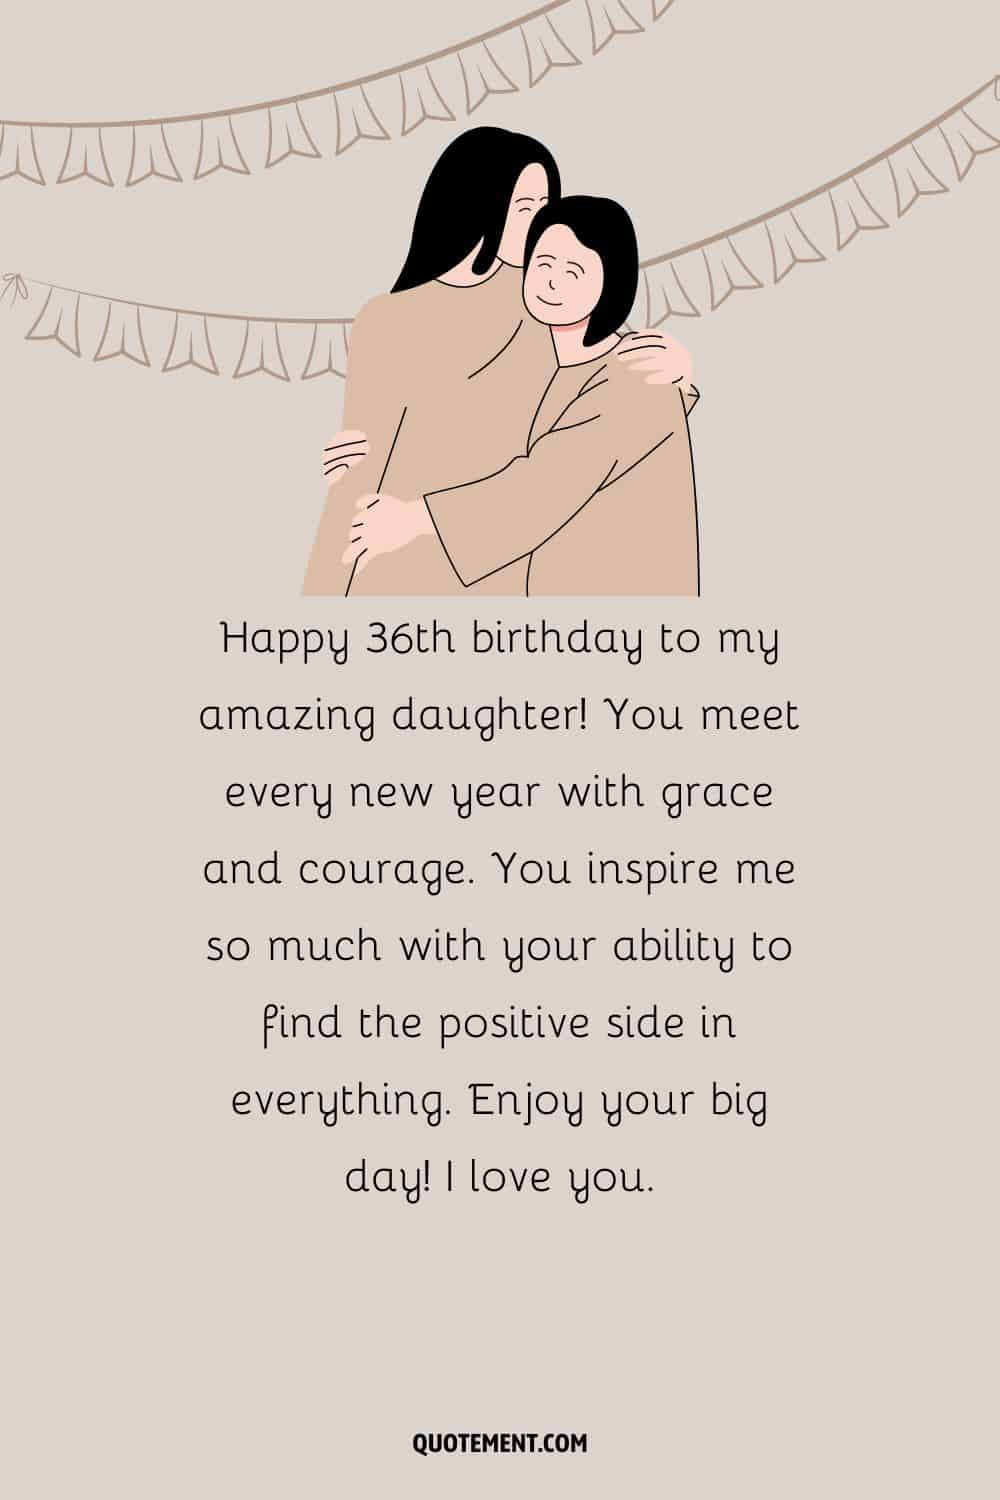 Illustration of mom and daughter representing birthday wish for a daughter.